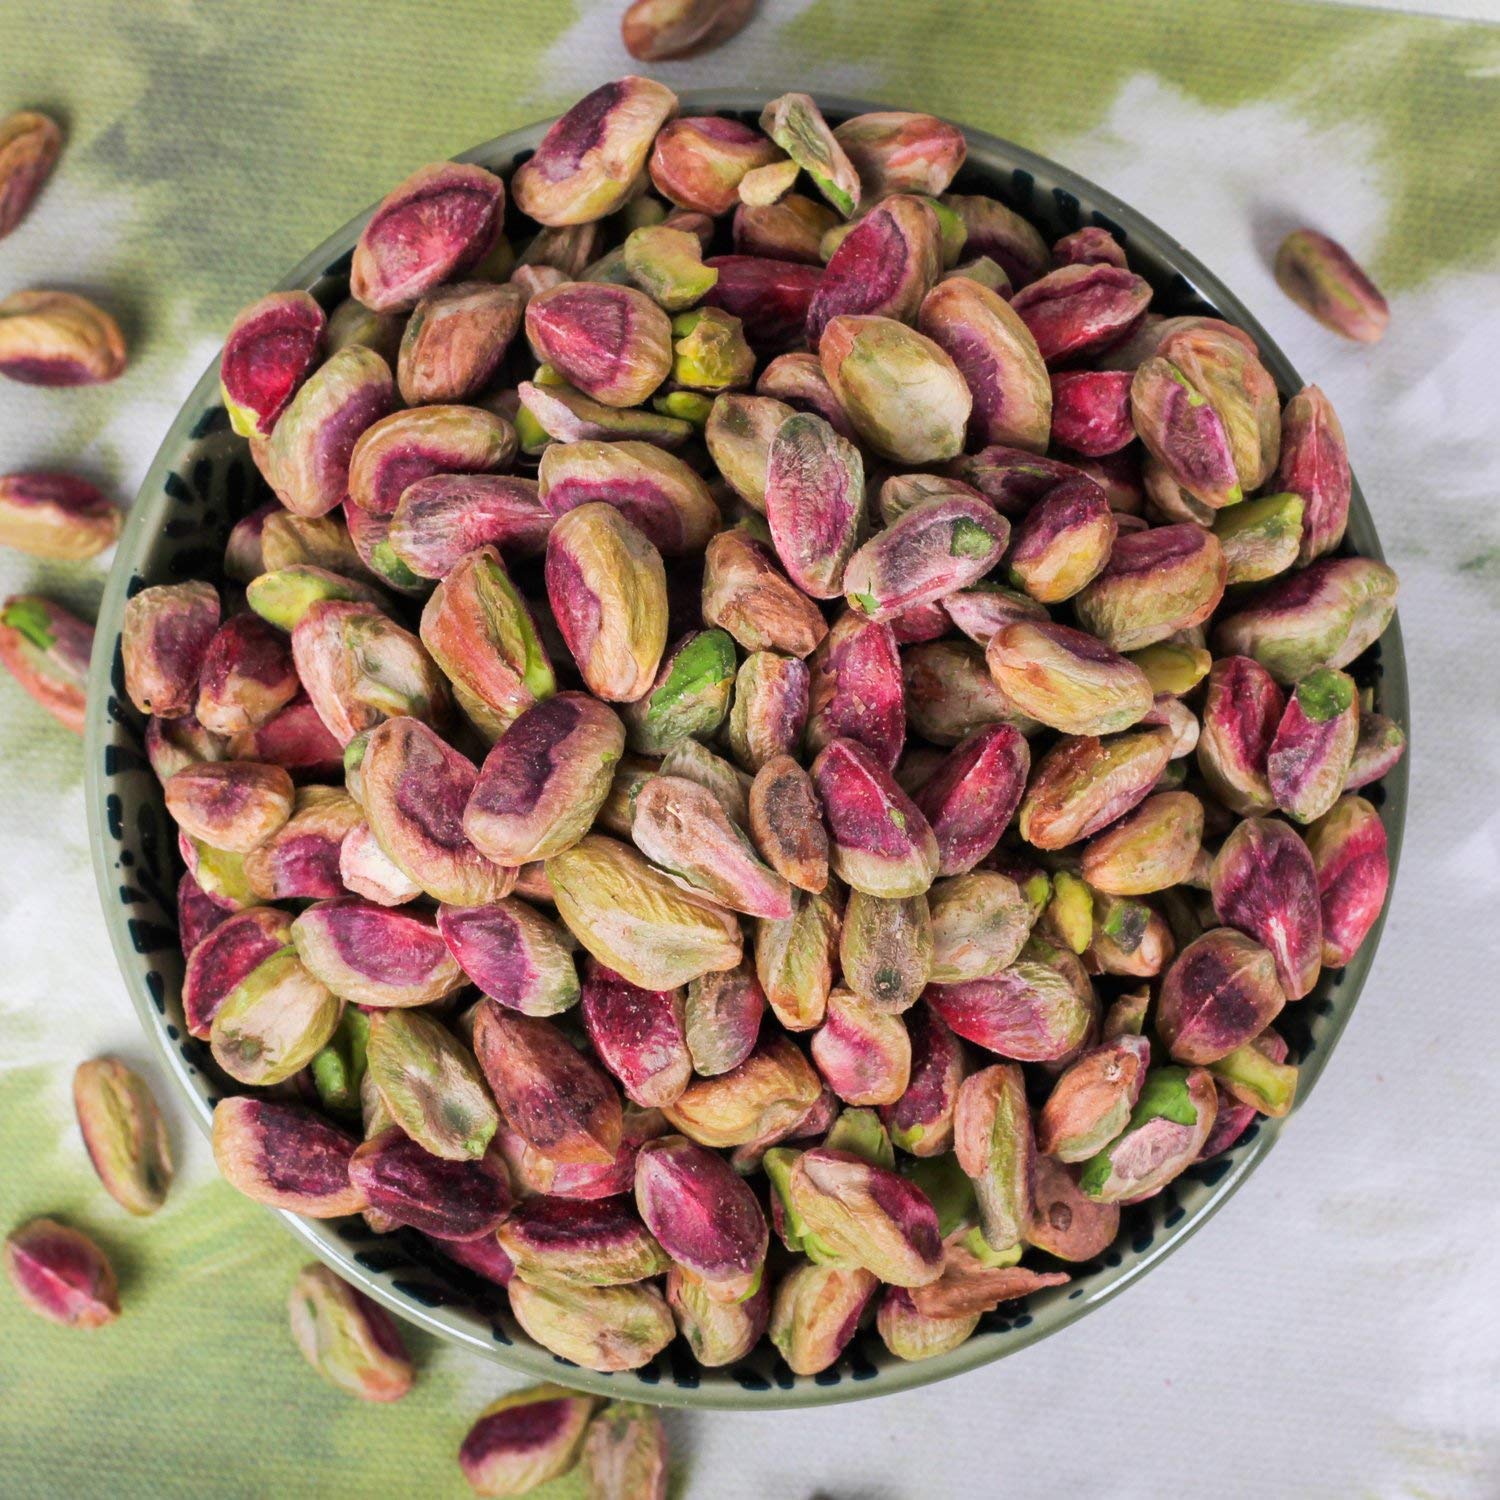 Nutex Manufacturer and exporter of pistachio kernels to India